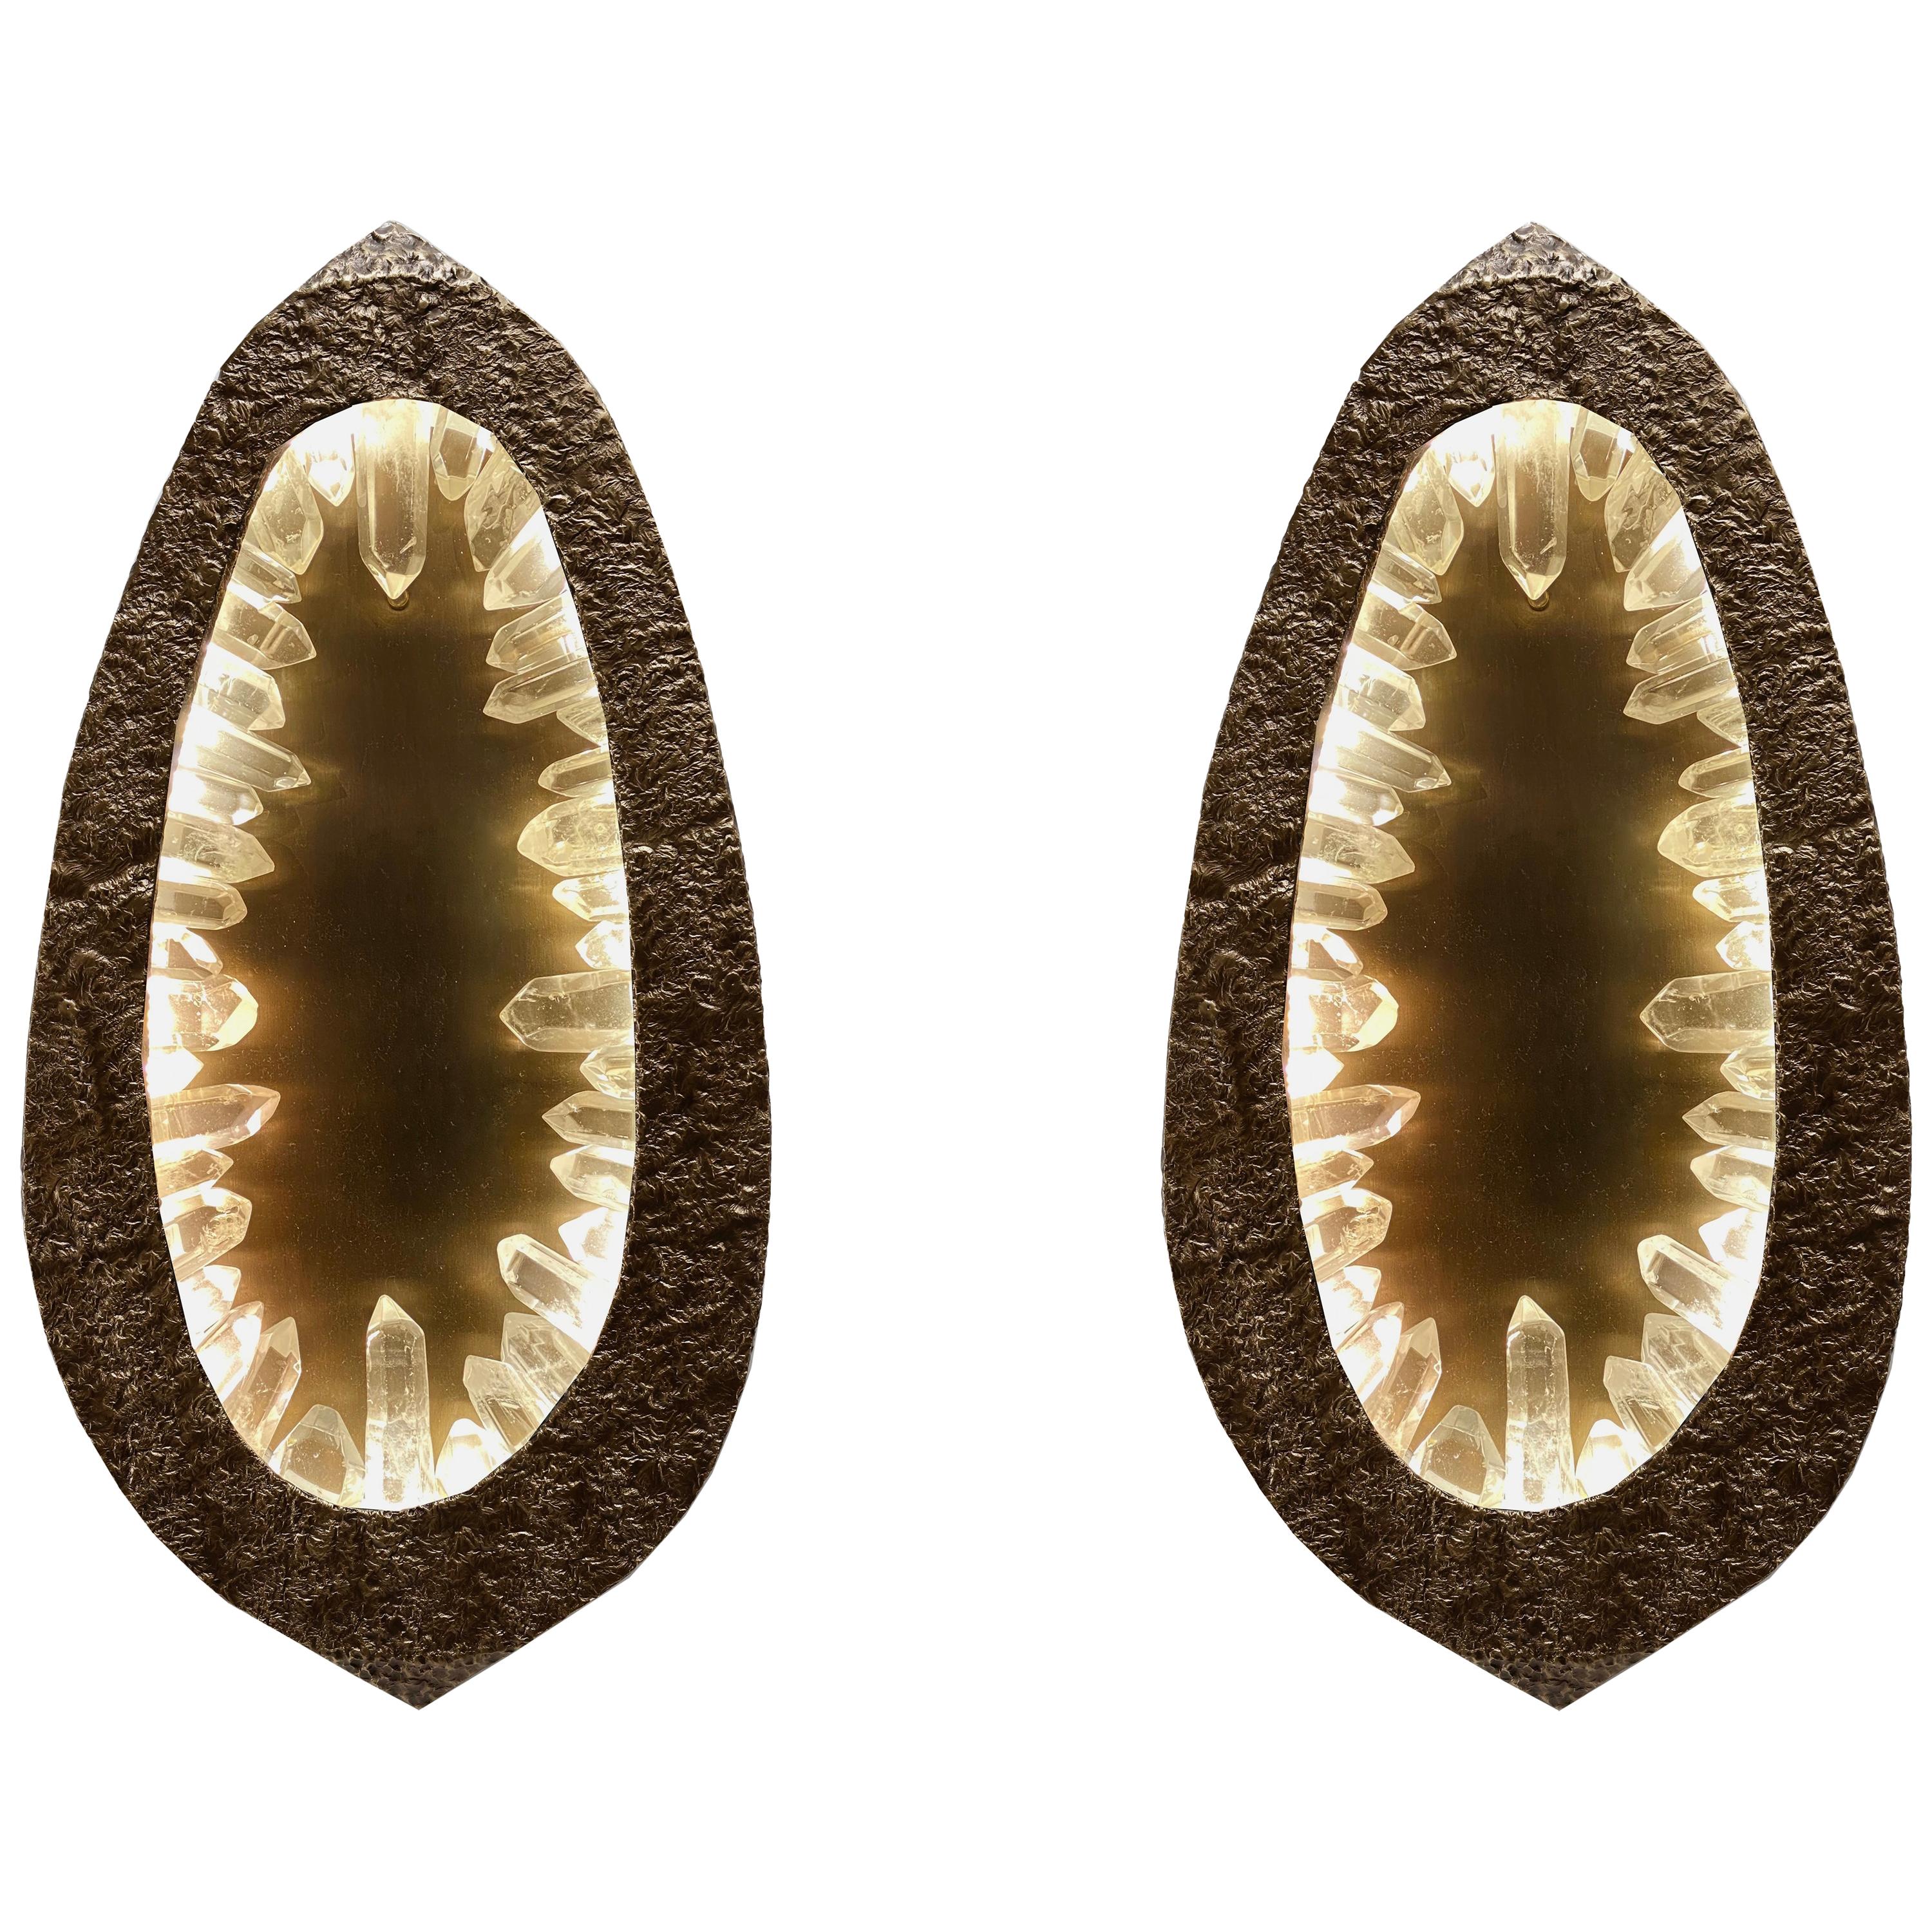 Grotto Rock Crystal Sconces by Phoenix